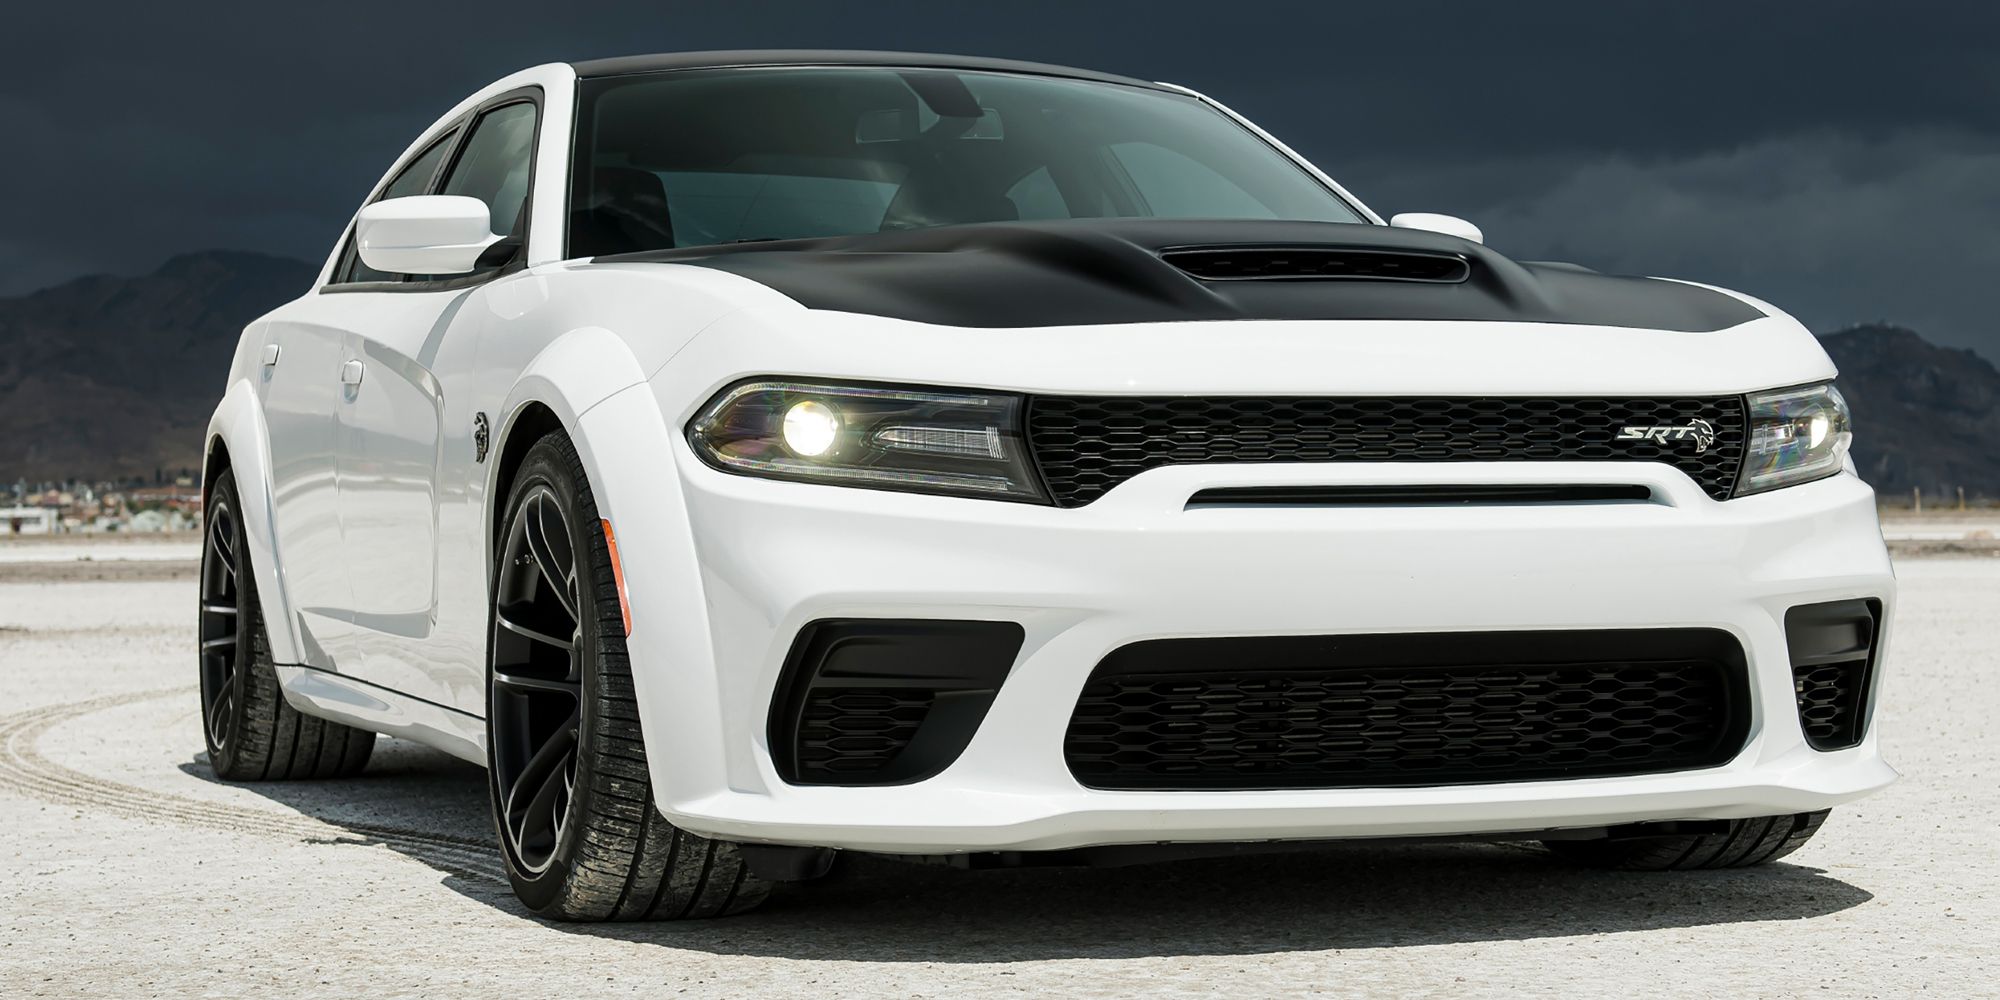 A white Charger Hellcat Widebody